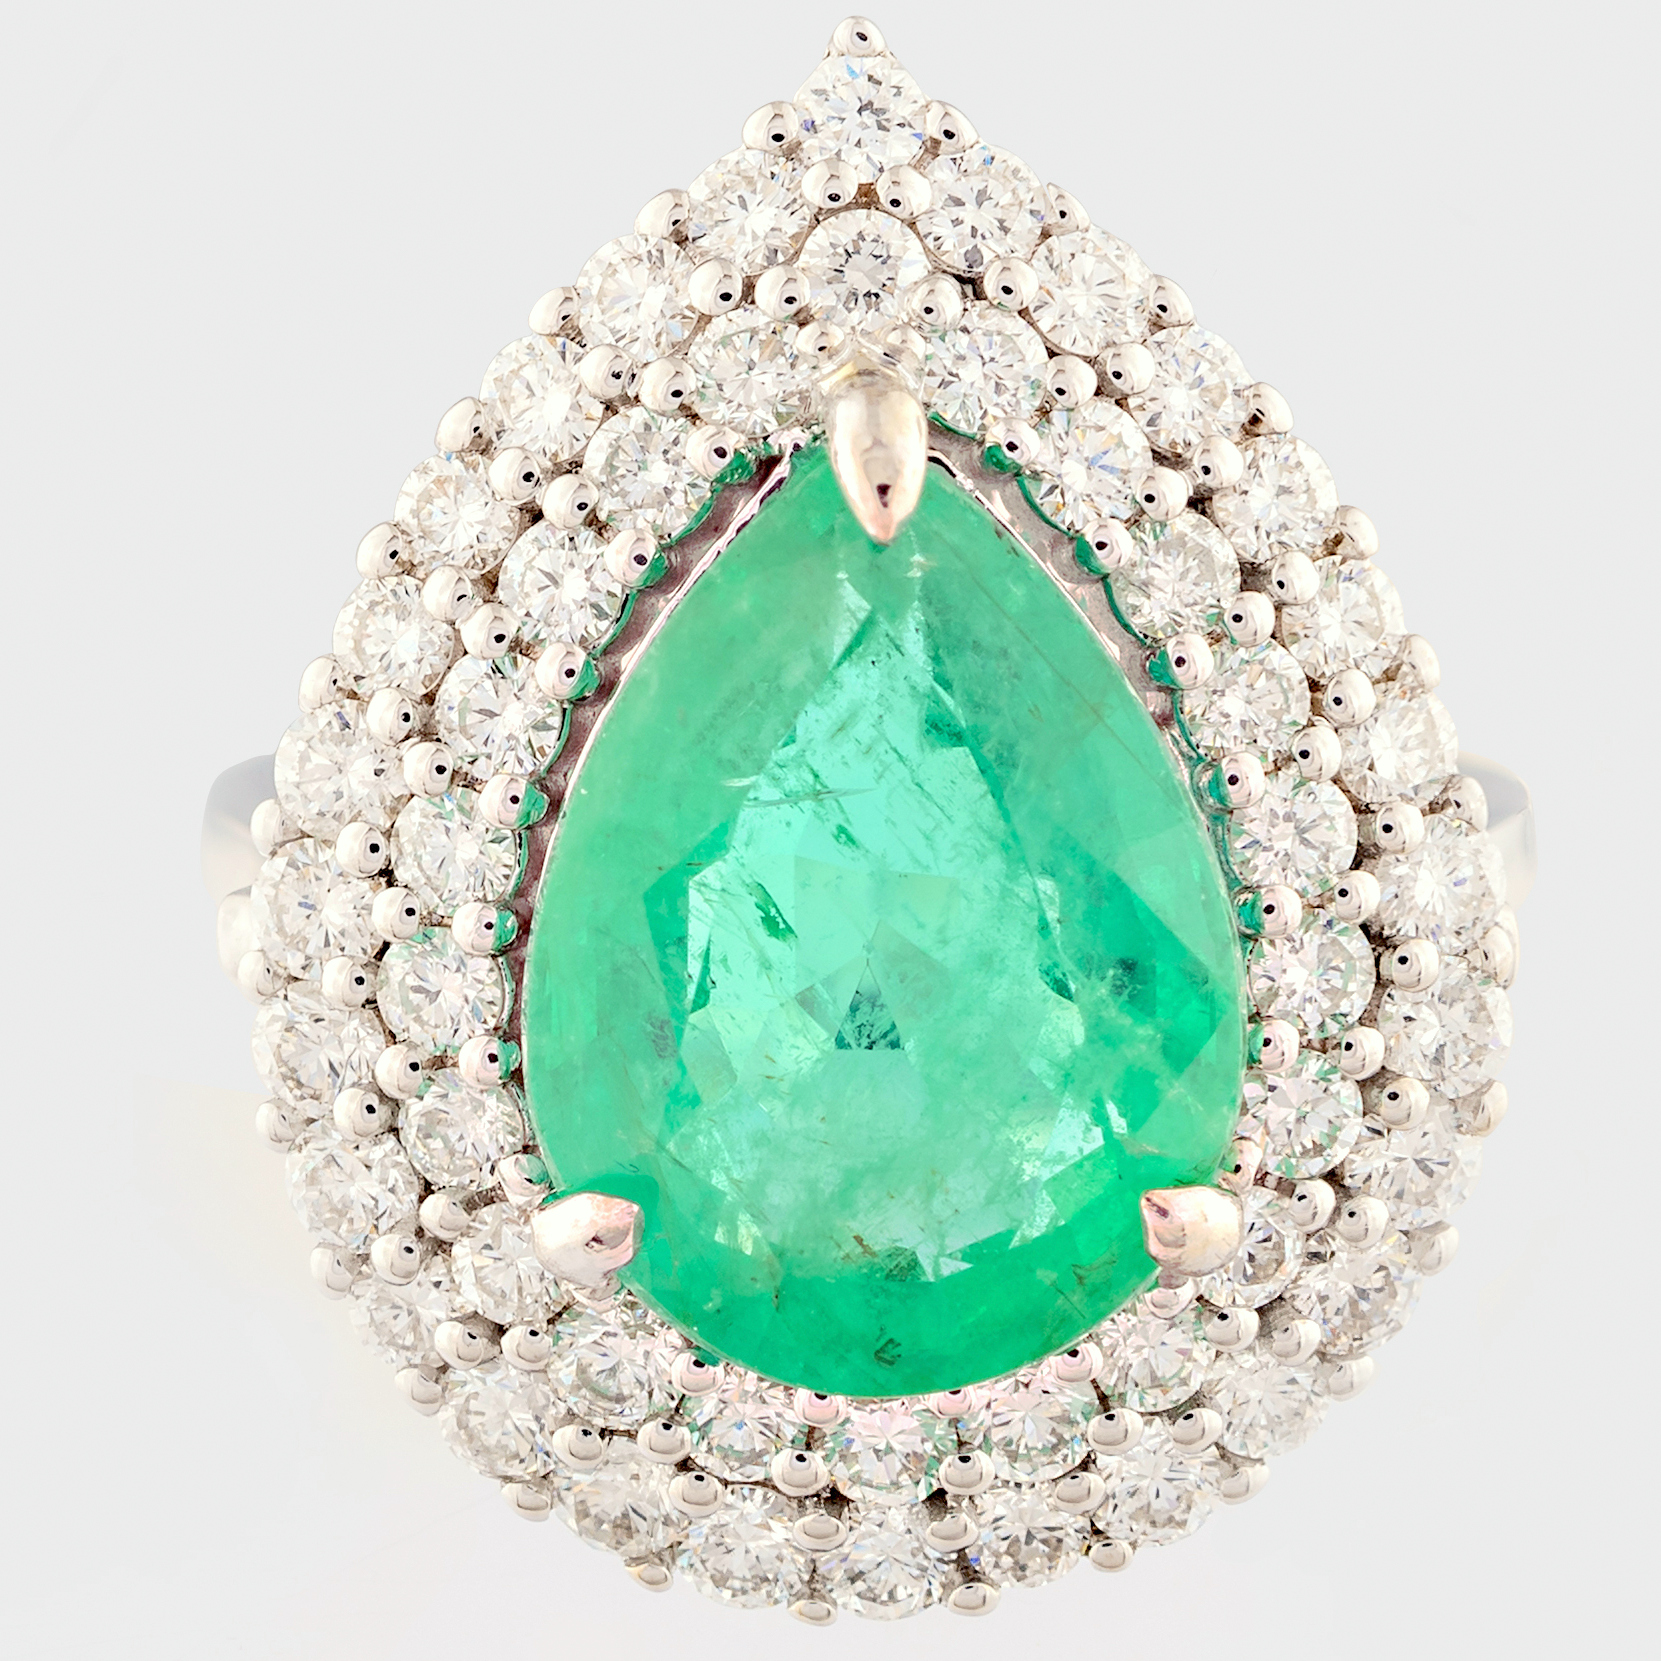 14K White Gold Cluster Ring 4,70 Ct. Natural Emerald - 1,40 Ct. Diamond - Image 2 of 4